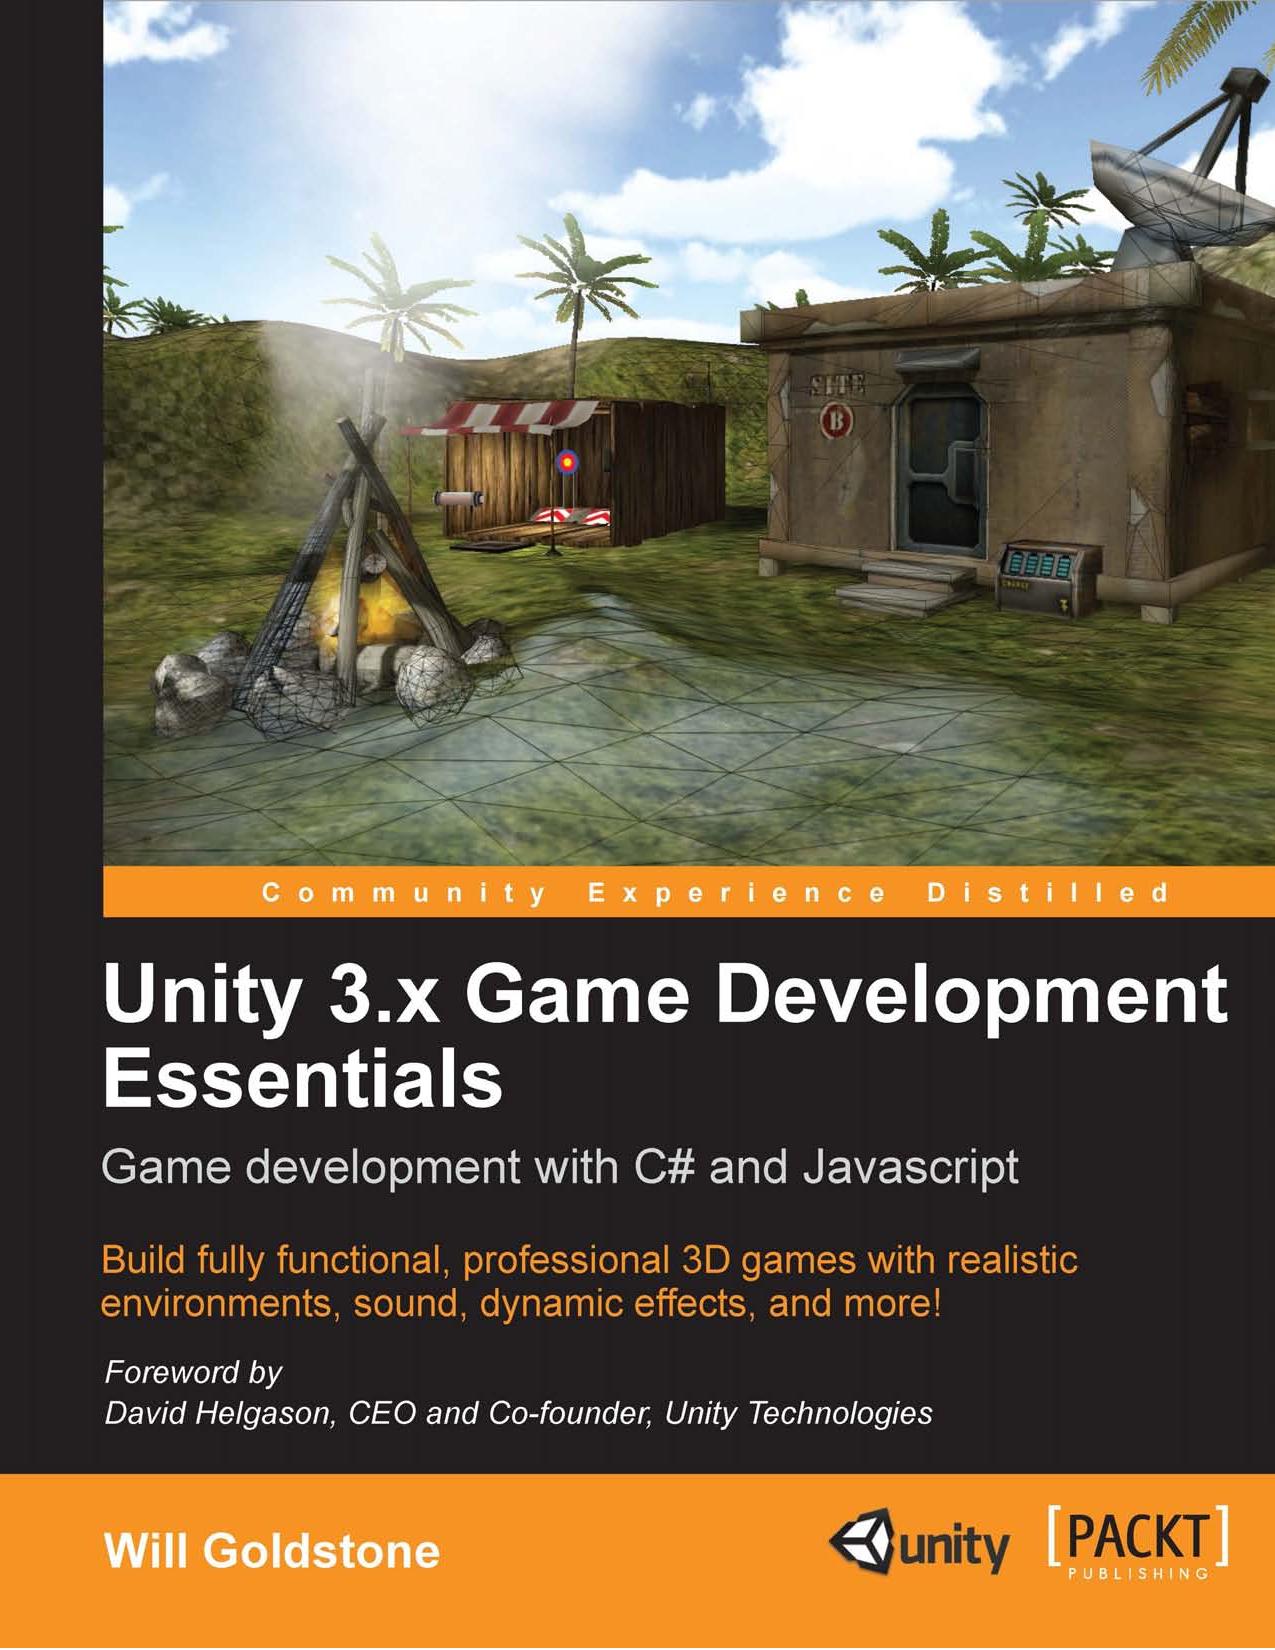 Unity 3.x Game Development Essentials: Game Development With C# and Javascript